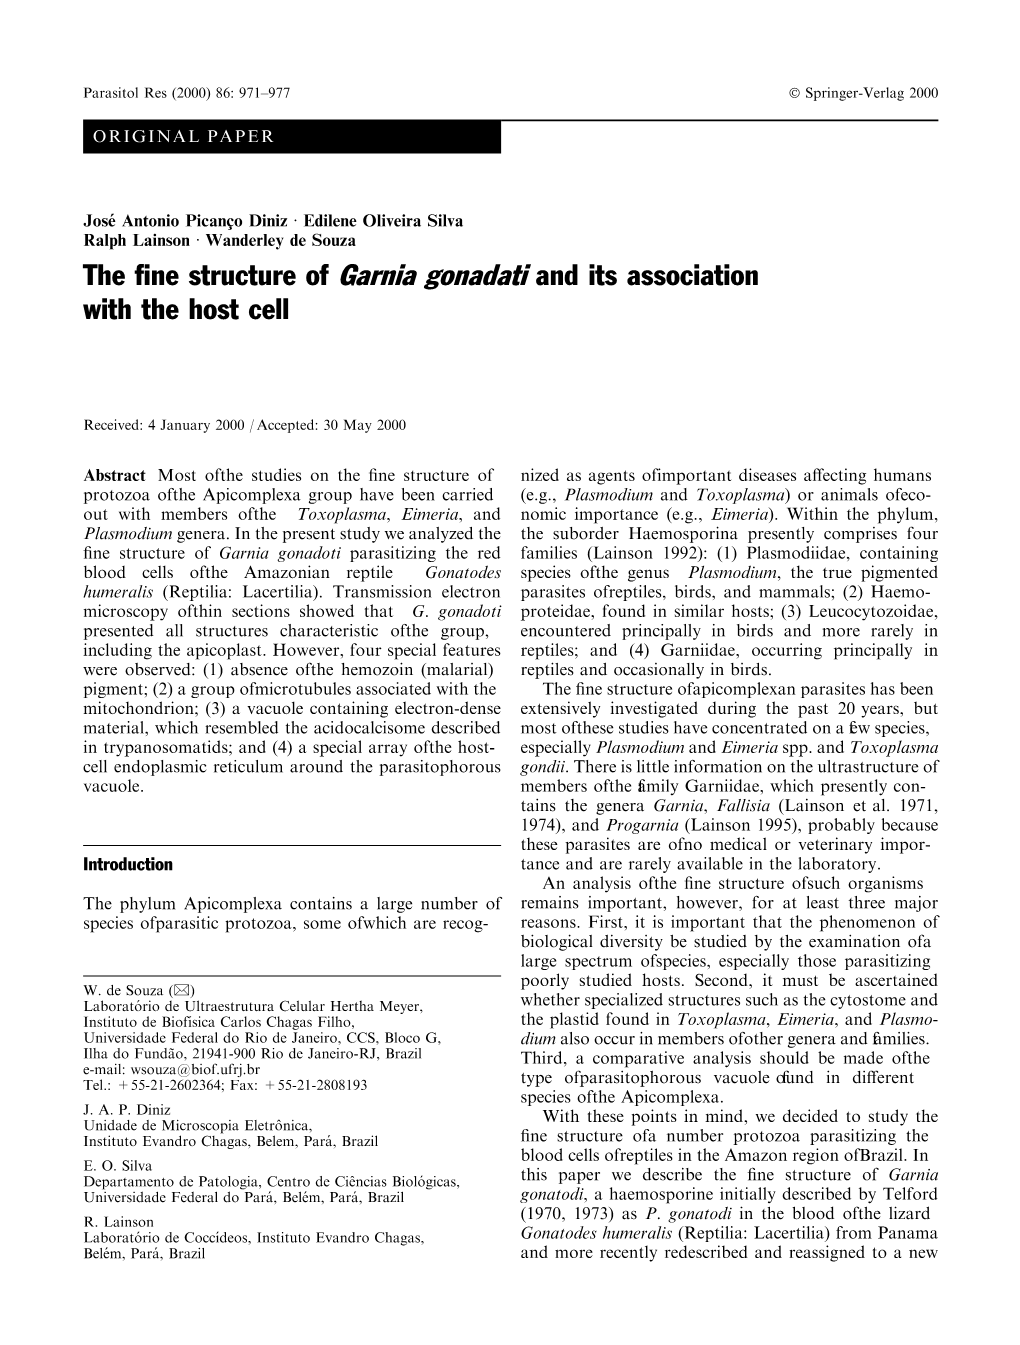 The ®Ne Structure of Garnia Gonadati and Its Association with the Host Cell